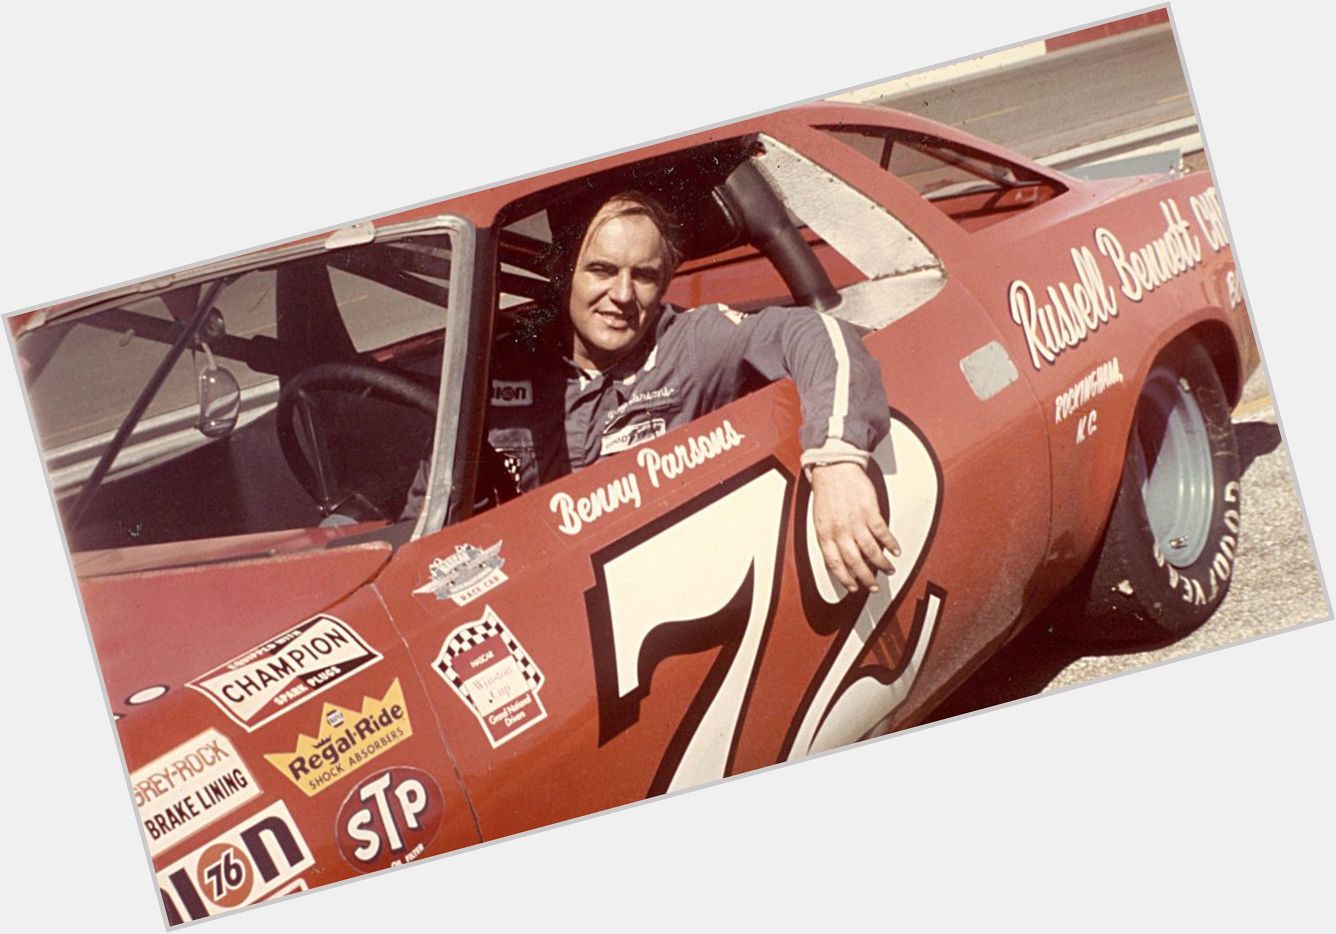 Happy Birthday to the late Benny Parsons, born on this day in 1941 